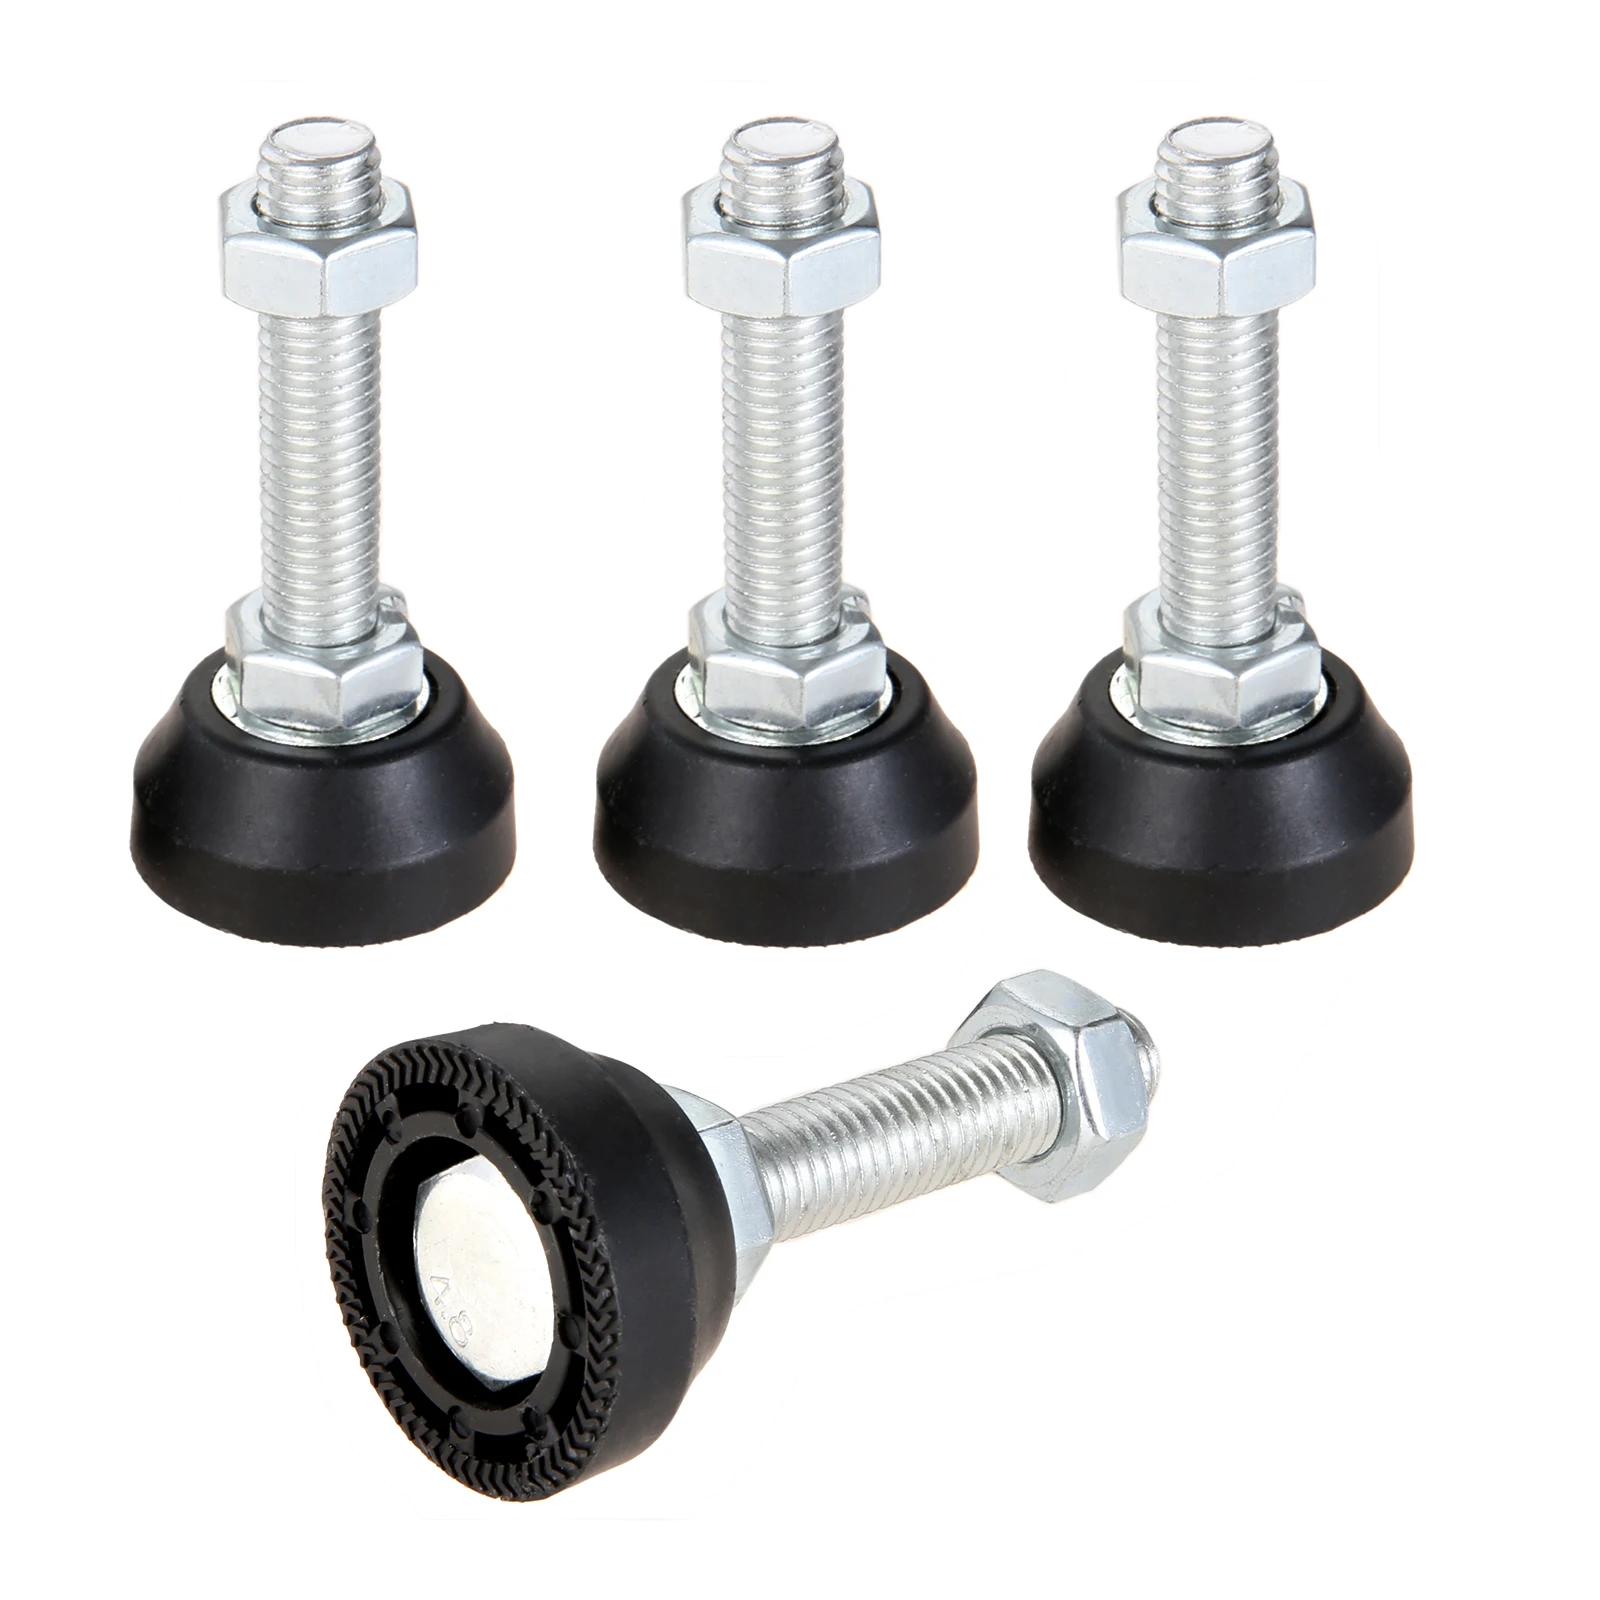 FT04 M8 THREADED ADJUSTABLE FOOT FEET FOR STAINLESS STEEL SINK TABLE BENCH ETC 